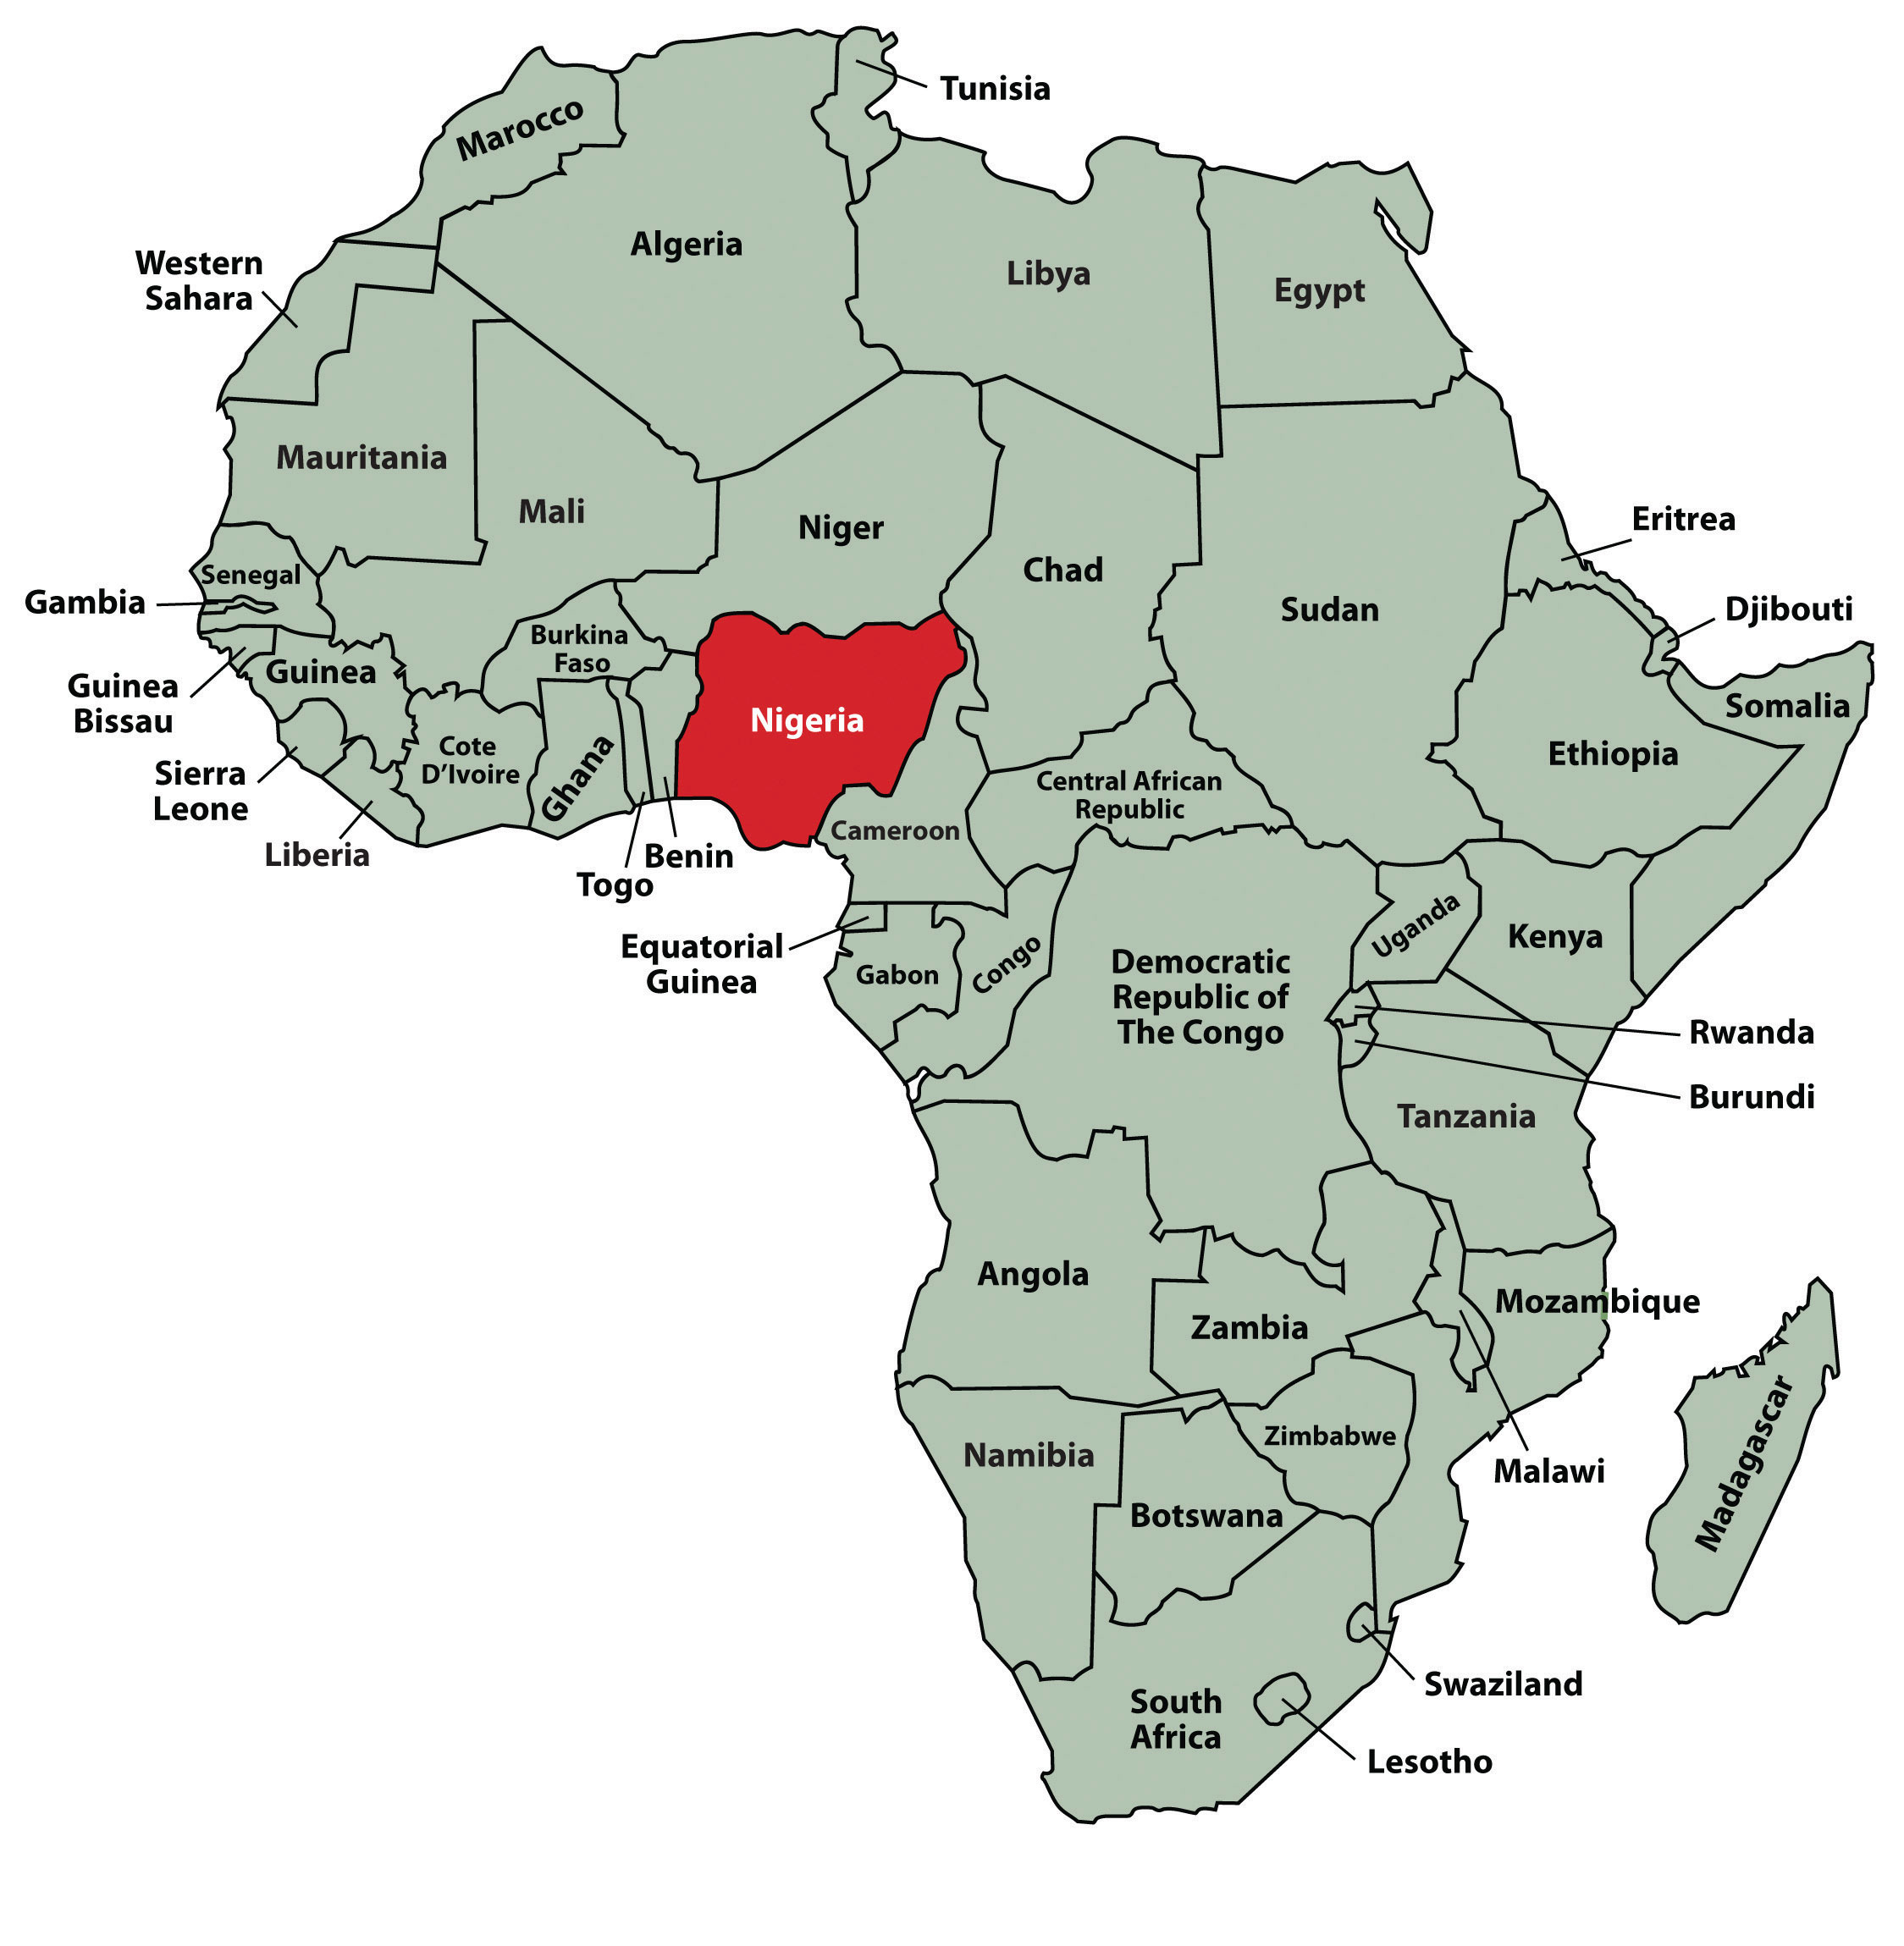 Map of Africa with Nigeria shaded red for emphasis.